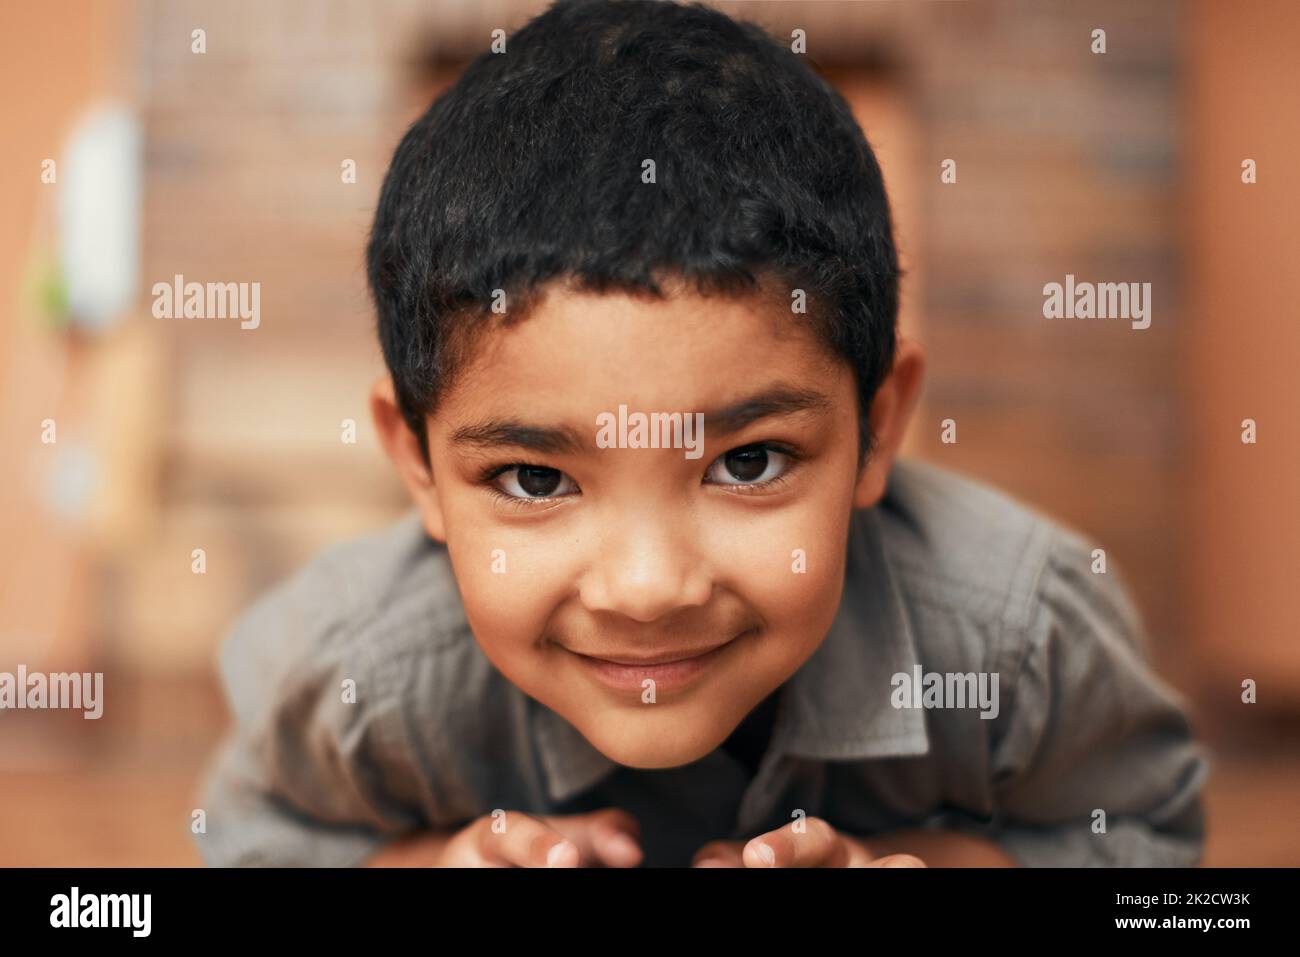 Showing off his collection of cars. Portrait of an adorable little boy playing with toy cars at home. Stock Photo